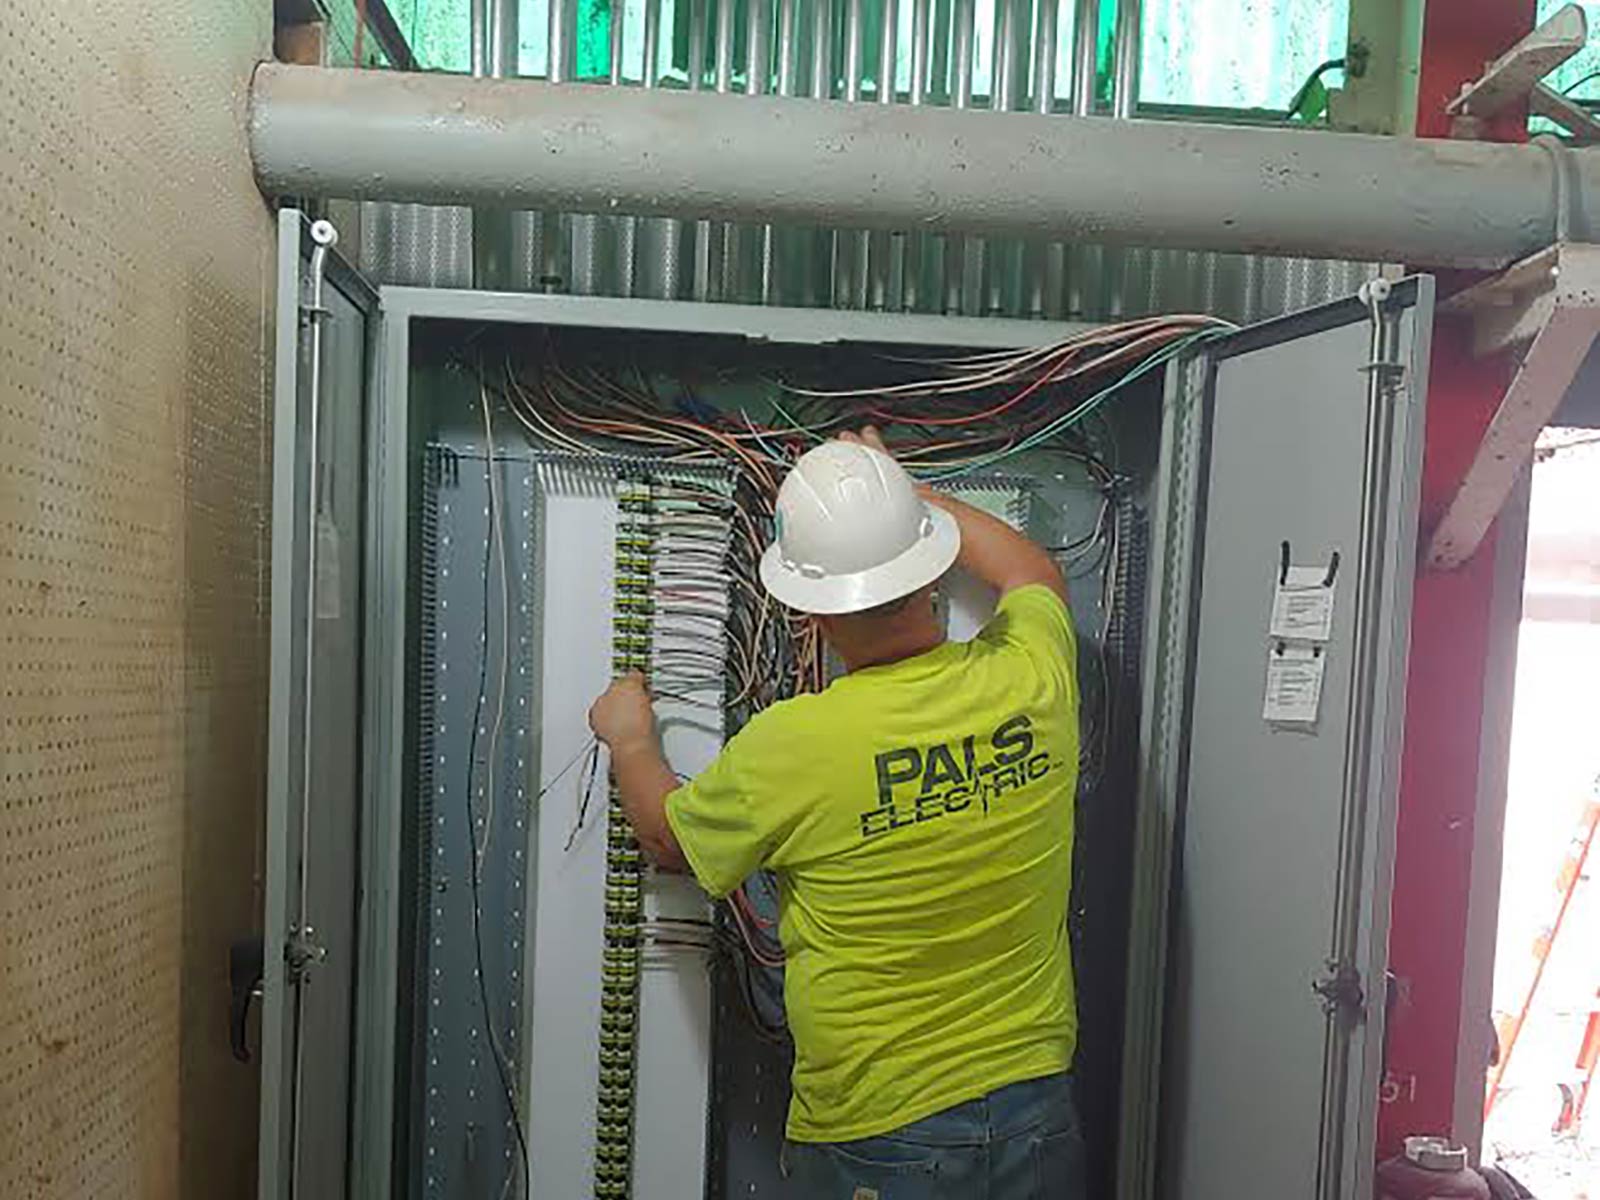 Pals Electric electrician working in a service panel at an industrial or manufacturing facility